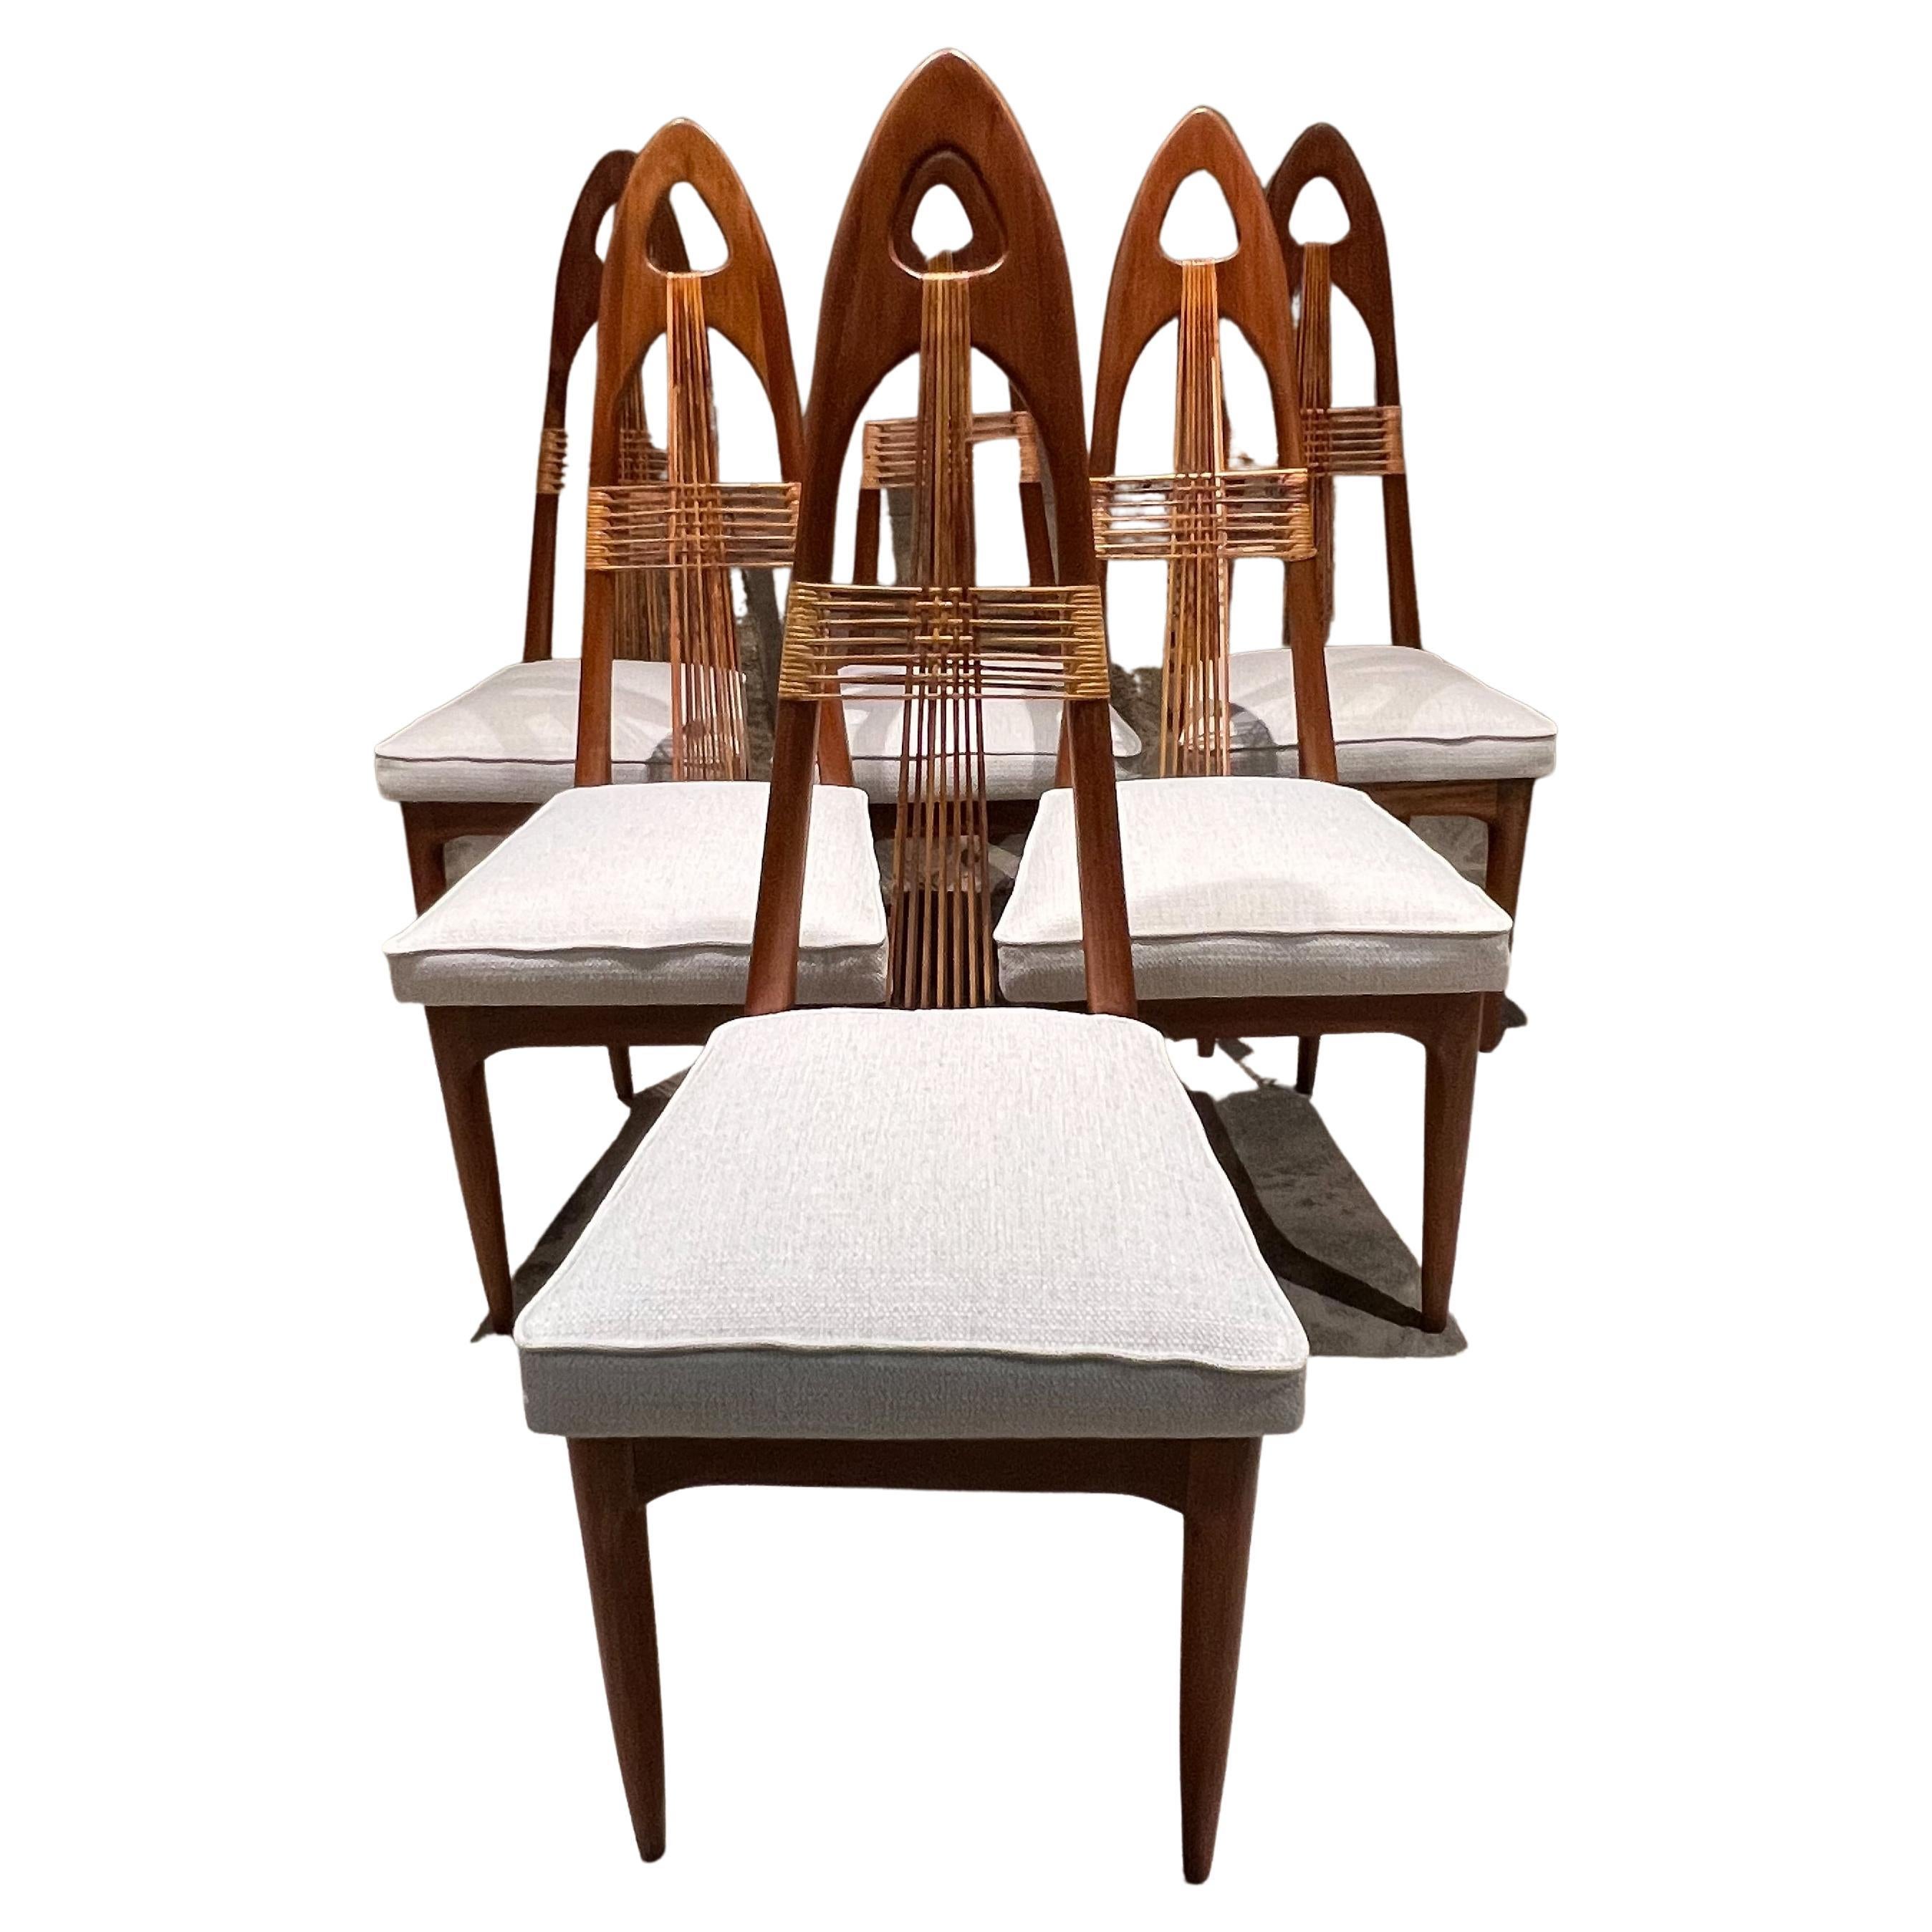 1950s Mexico Six Spectacular Modern Gothic Cross Dining Chairs Mahogany and Cane